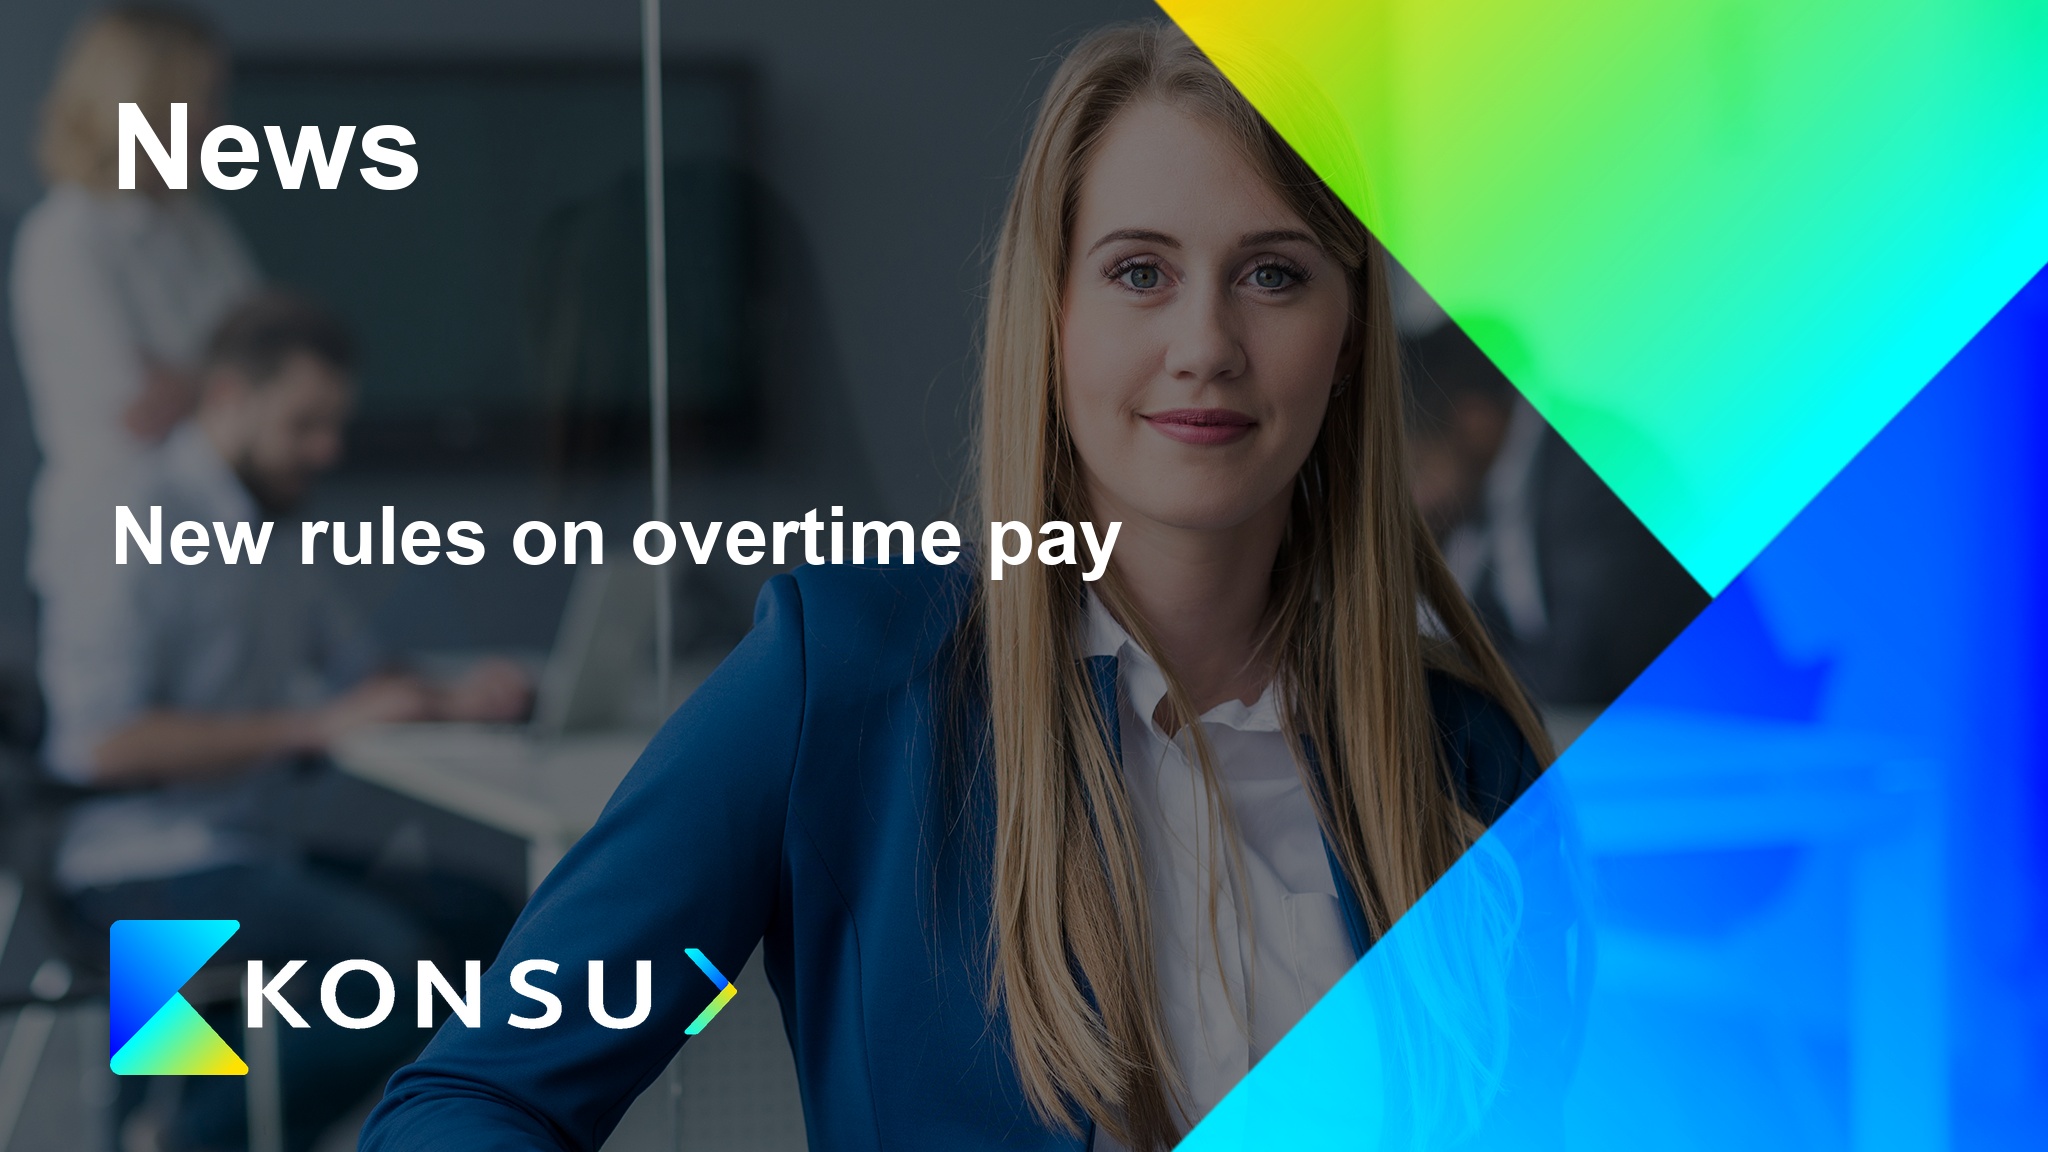 New rules overtime pay en konsu outsourcing consulting ru kz cis